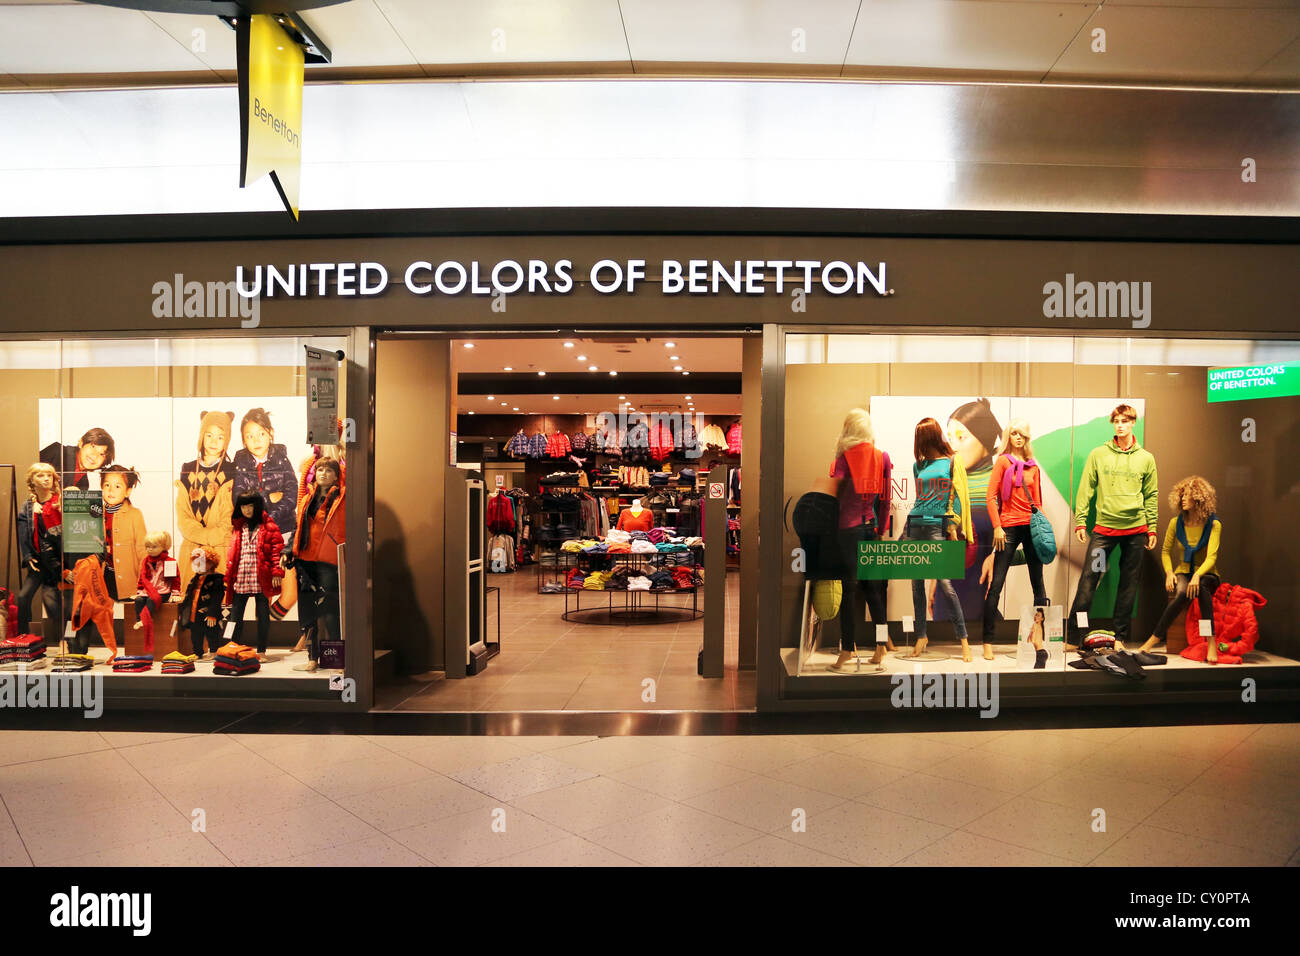 United Colours Of Benetton High Resolution Stock Photography and Images -  Alamy